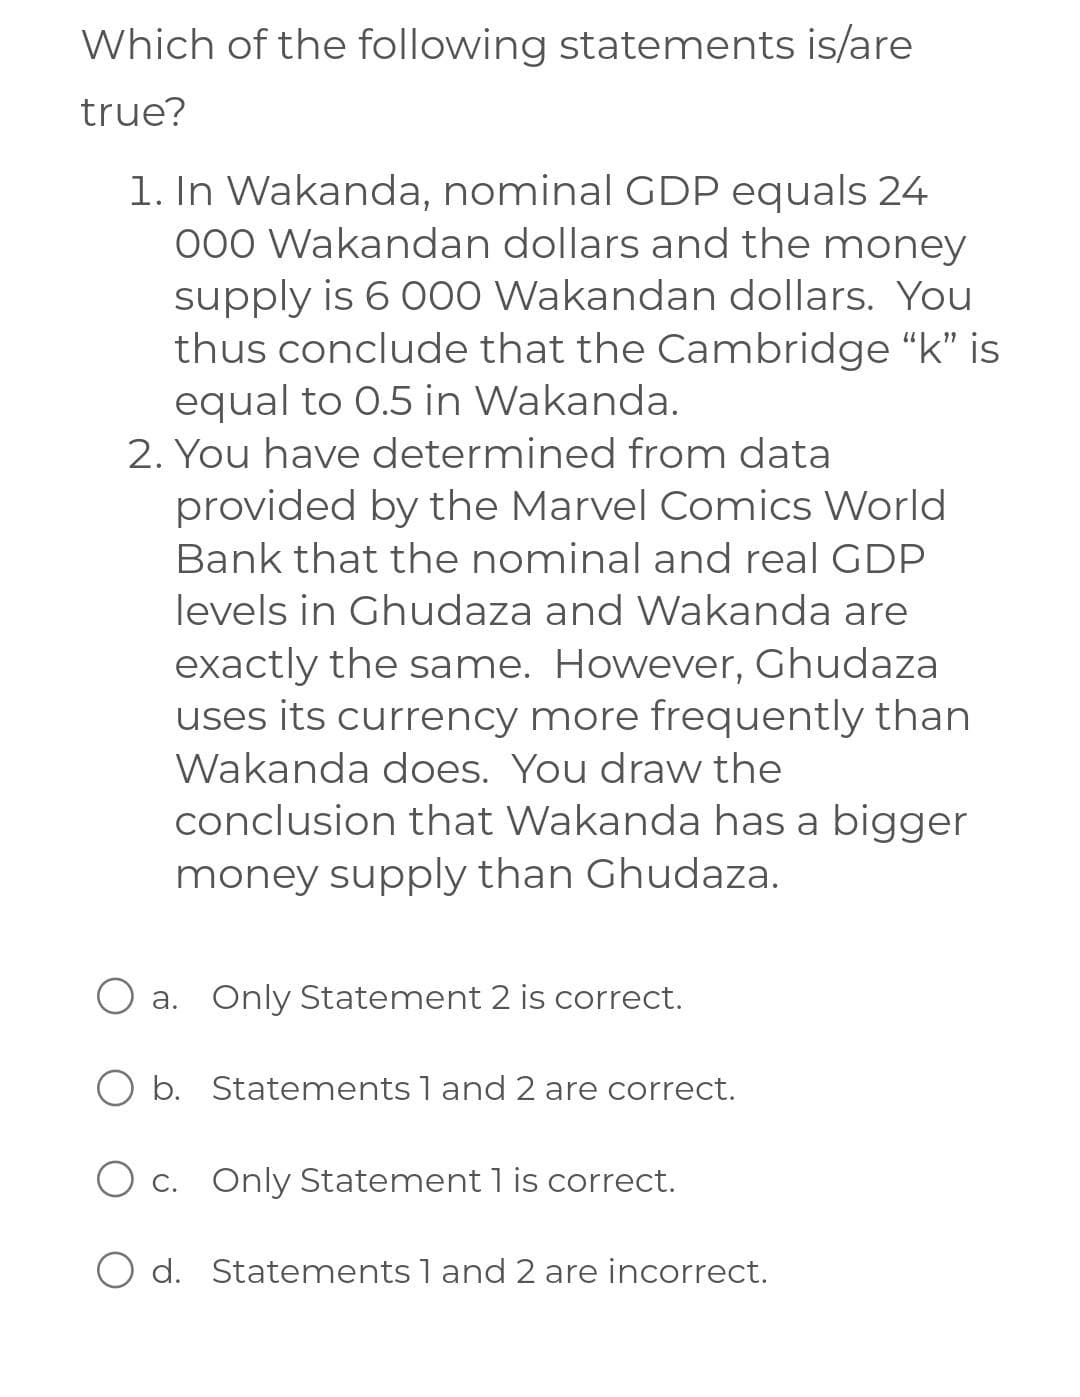 Which of the following statements is/are
true?
1. In Wakanda, nominal GDP equals 24
000 Wakandan dollars and the money
supply is 6 000 Wakandan dollars. You
thus conclude that the Cambridge "k" is
equal to 0.5 in Wakanda.
2. You have determined from data
provided by the Marvel Comics World
Bank that the nominal and real GDP
levels in Ghudaza and Wakanda are
exactly the same. However, Ghudaza
uses its currency more frequently than
Wakanda does. You draw the
conclusion that Wakanda has a bigger
money supply than Ghudaza.
O a.
O b.
O c.
O d.
Only Statement 2 is correct.
Statements 1 and 2 are correct.
Only Statement 1 is correct.
Statements 1 and 2 are incorrect.